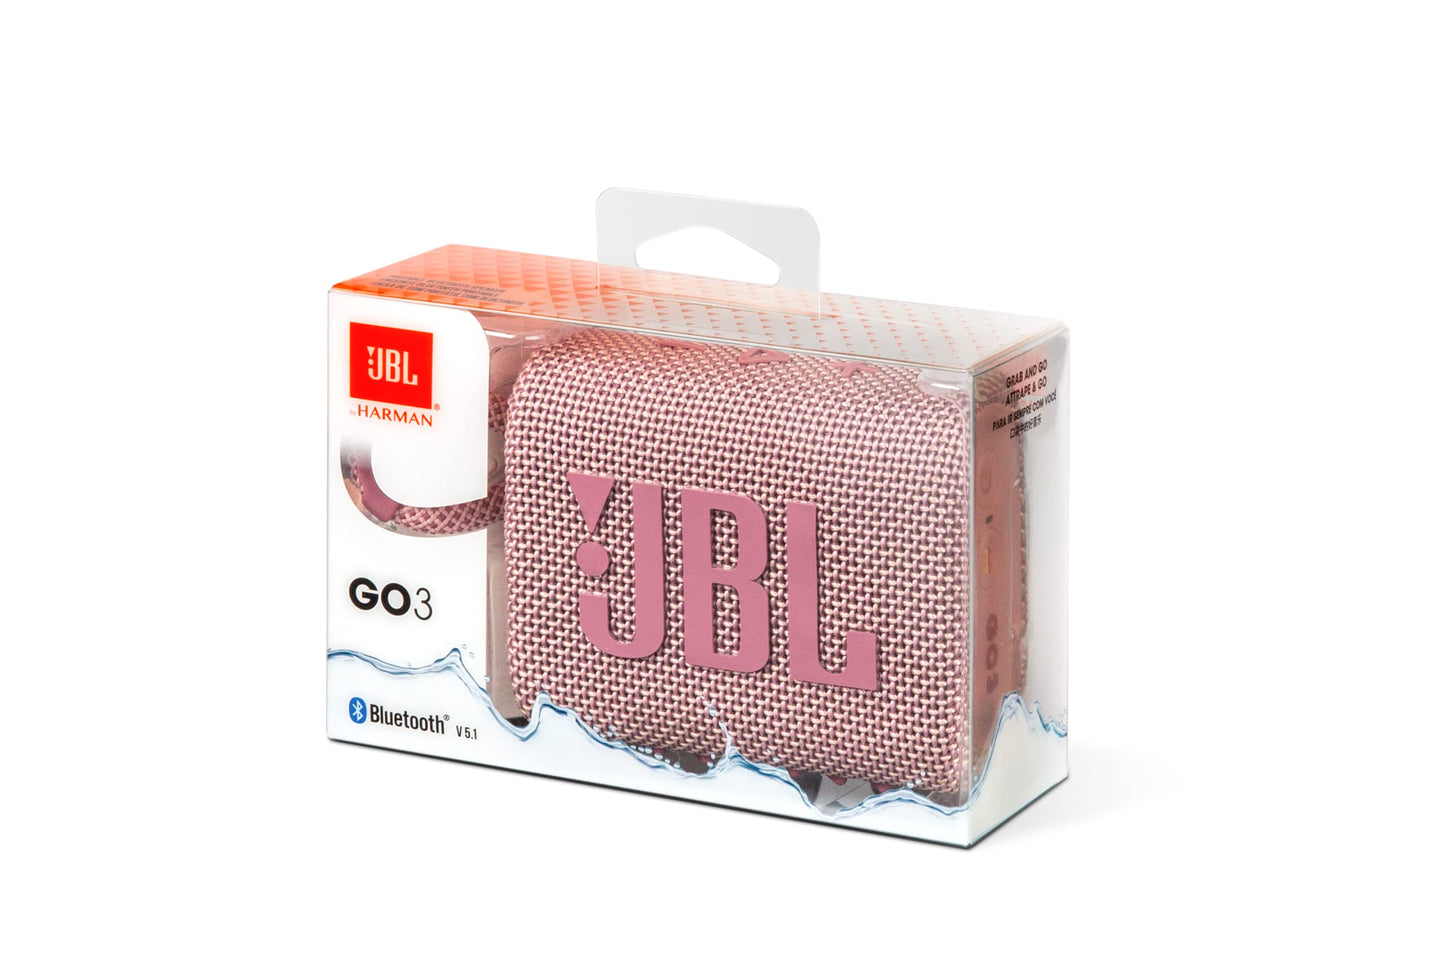 JBL Go 3 Portable Waterproof Speaker with JBL Pro Sound, Powerful Audio, Punchy Bass, Ultra-Compact Size, Dustproof, Wireless Bluetooth Streaming, 5 Hours of Playtime - Pink, JBLGO3PINK, Small